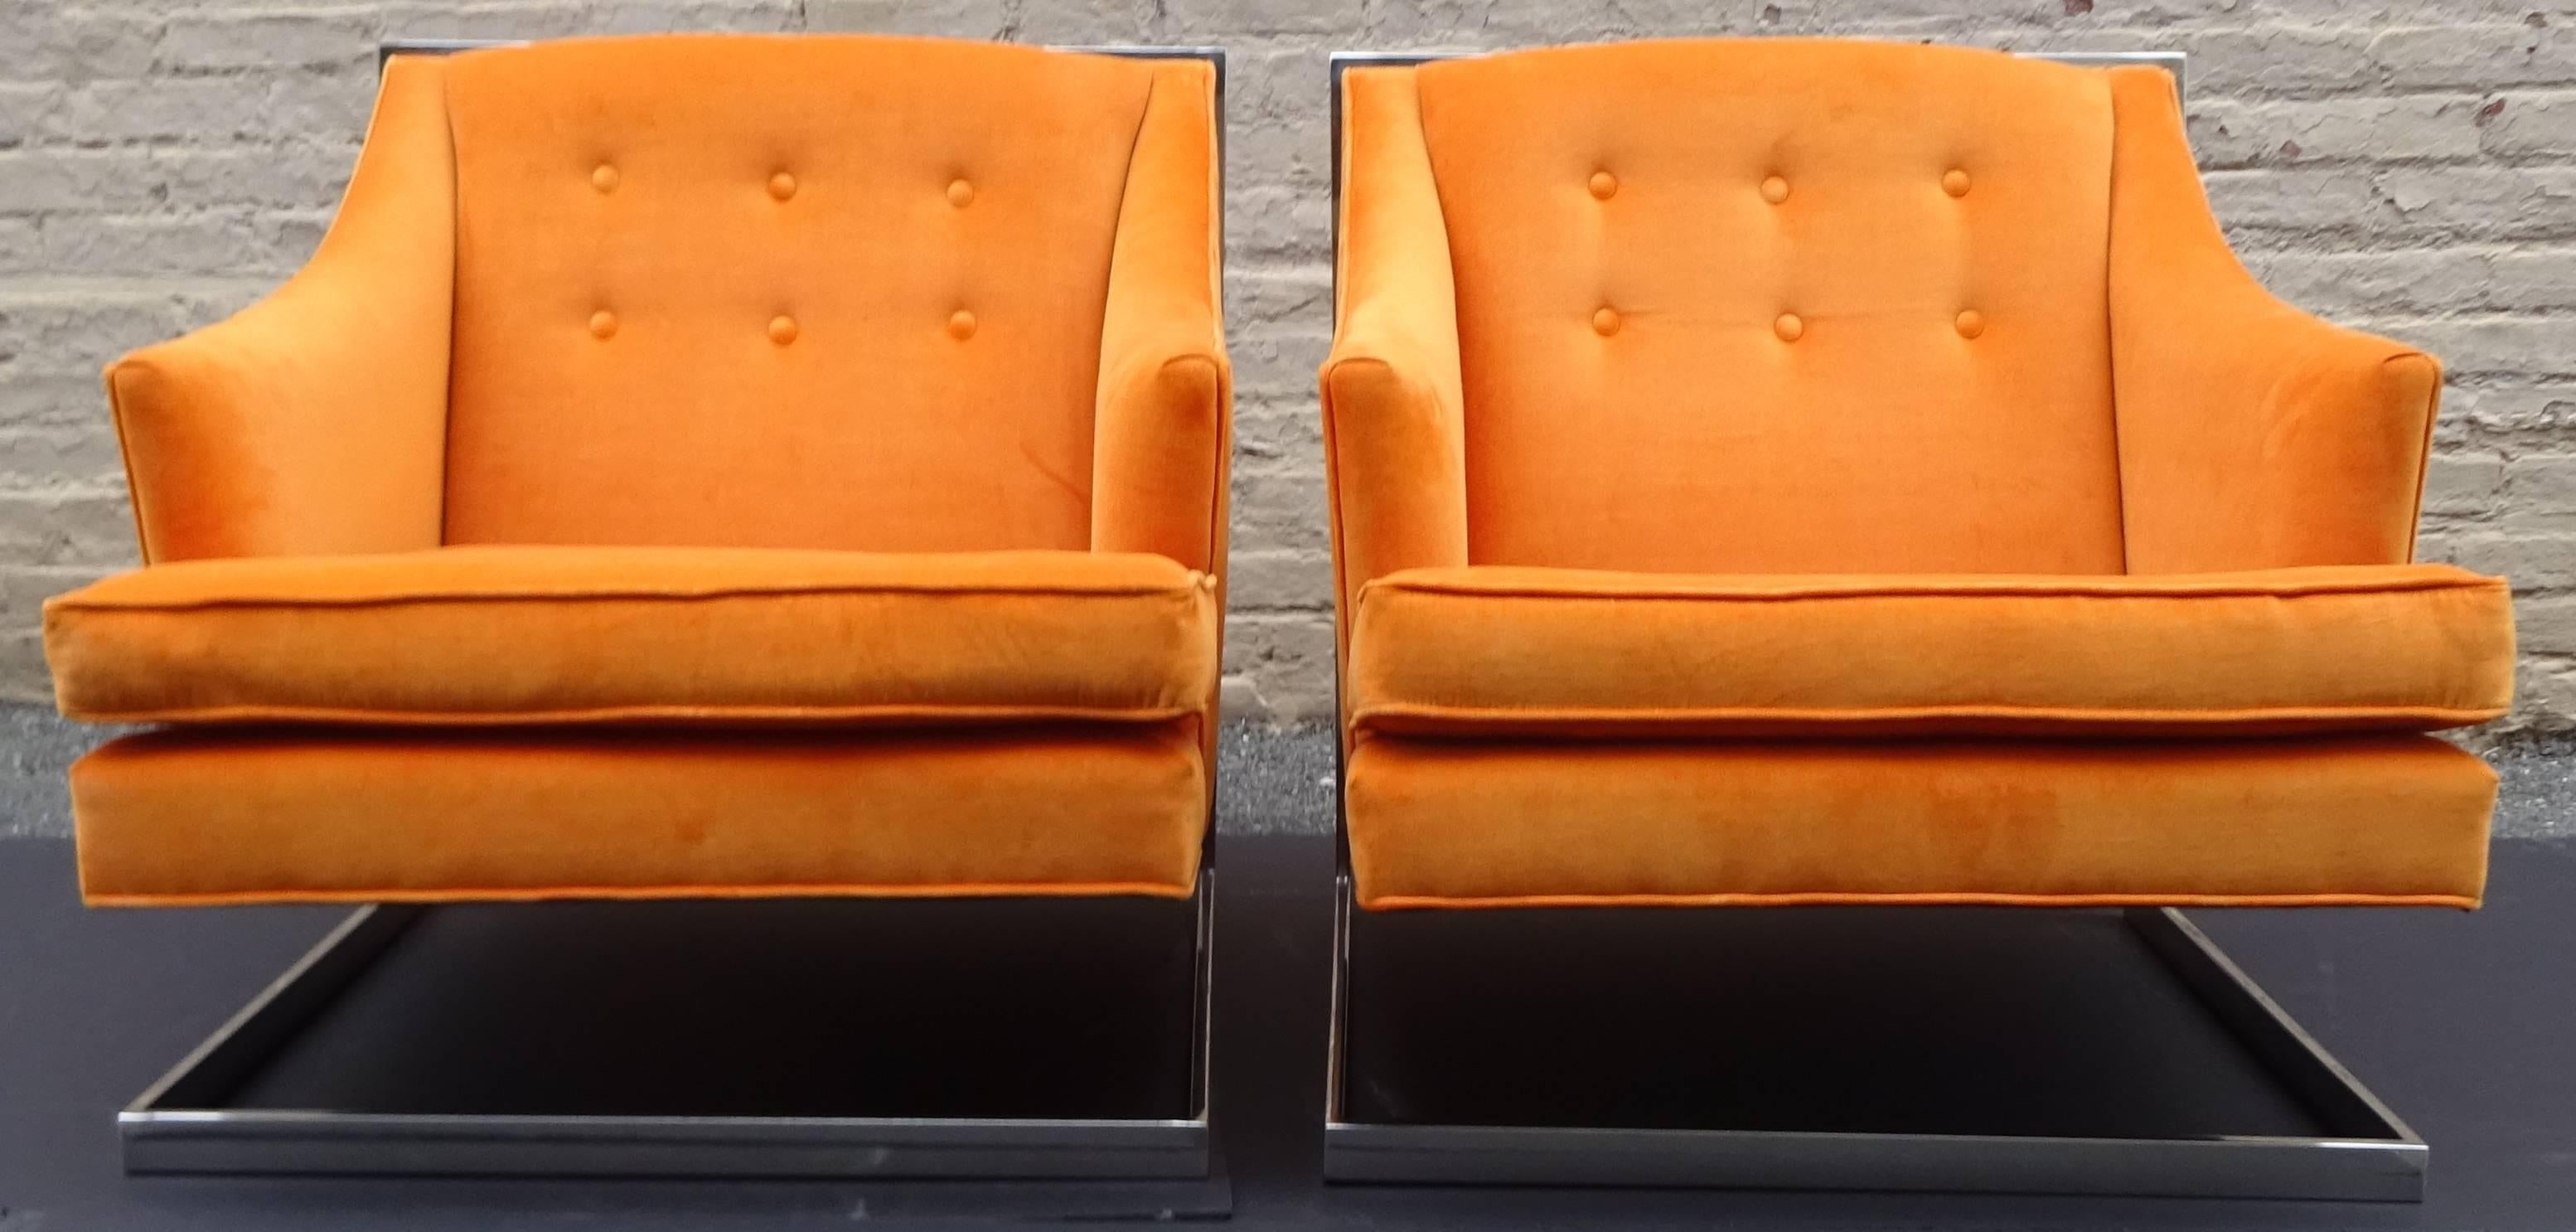 Fabulous pair of 1970s cantilevered chrome lounge chairs designed by Milo Baughman.